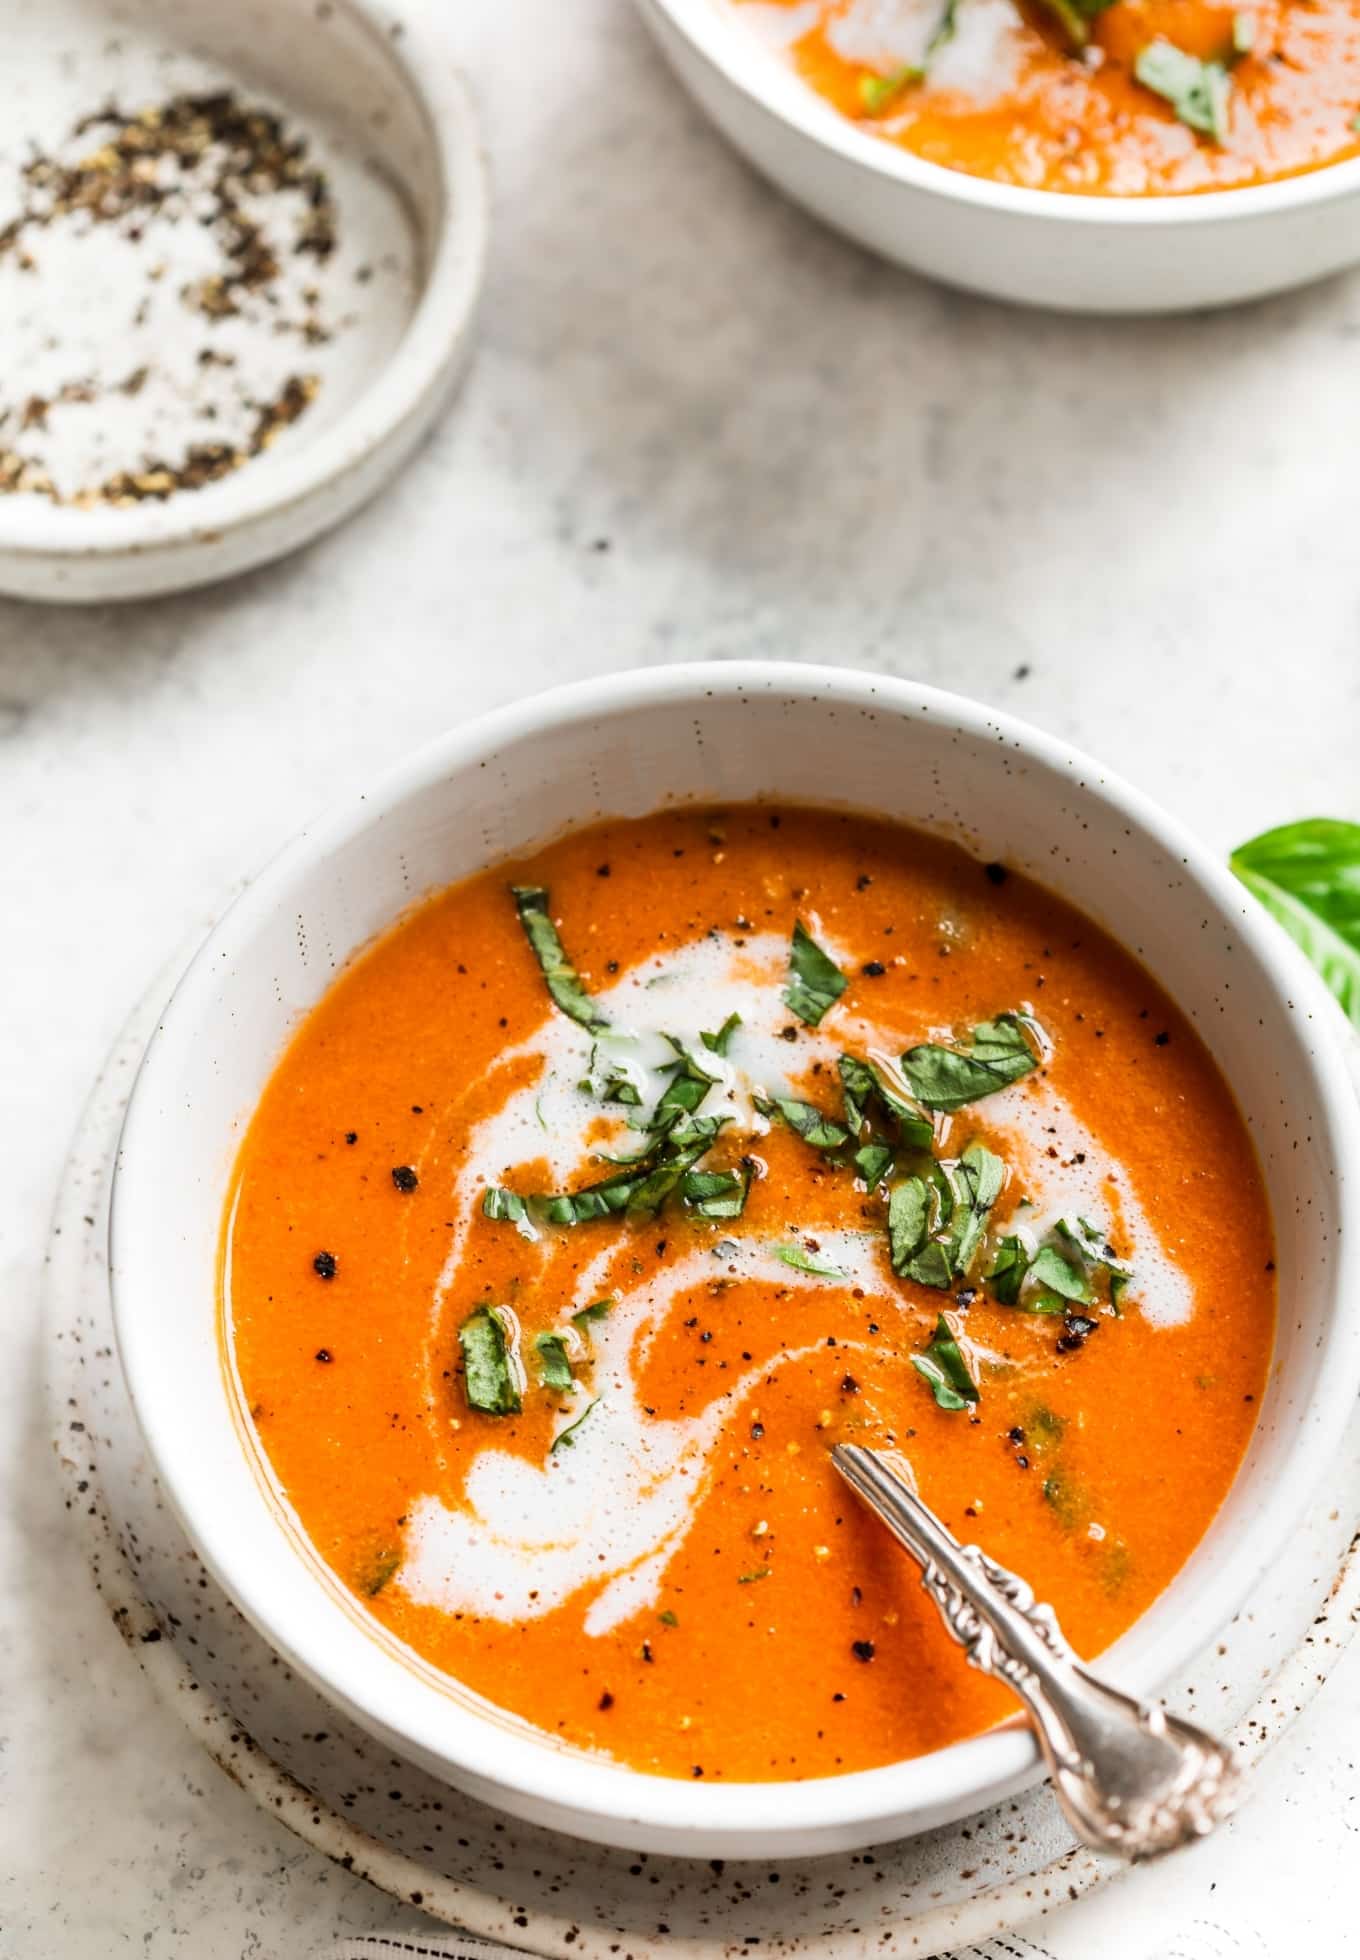 30 Minute Dairy Free Tomato Basil Soup - The Whole Cook